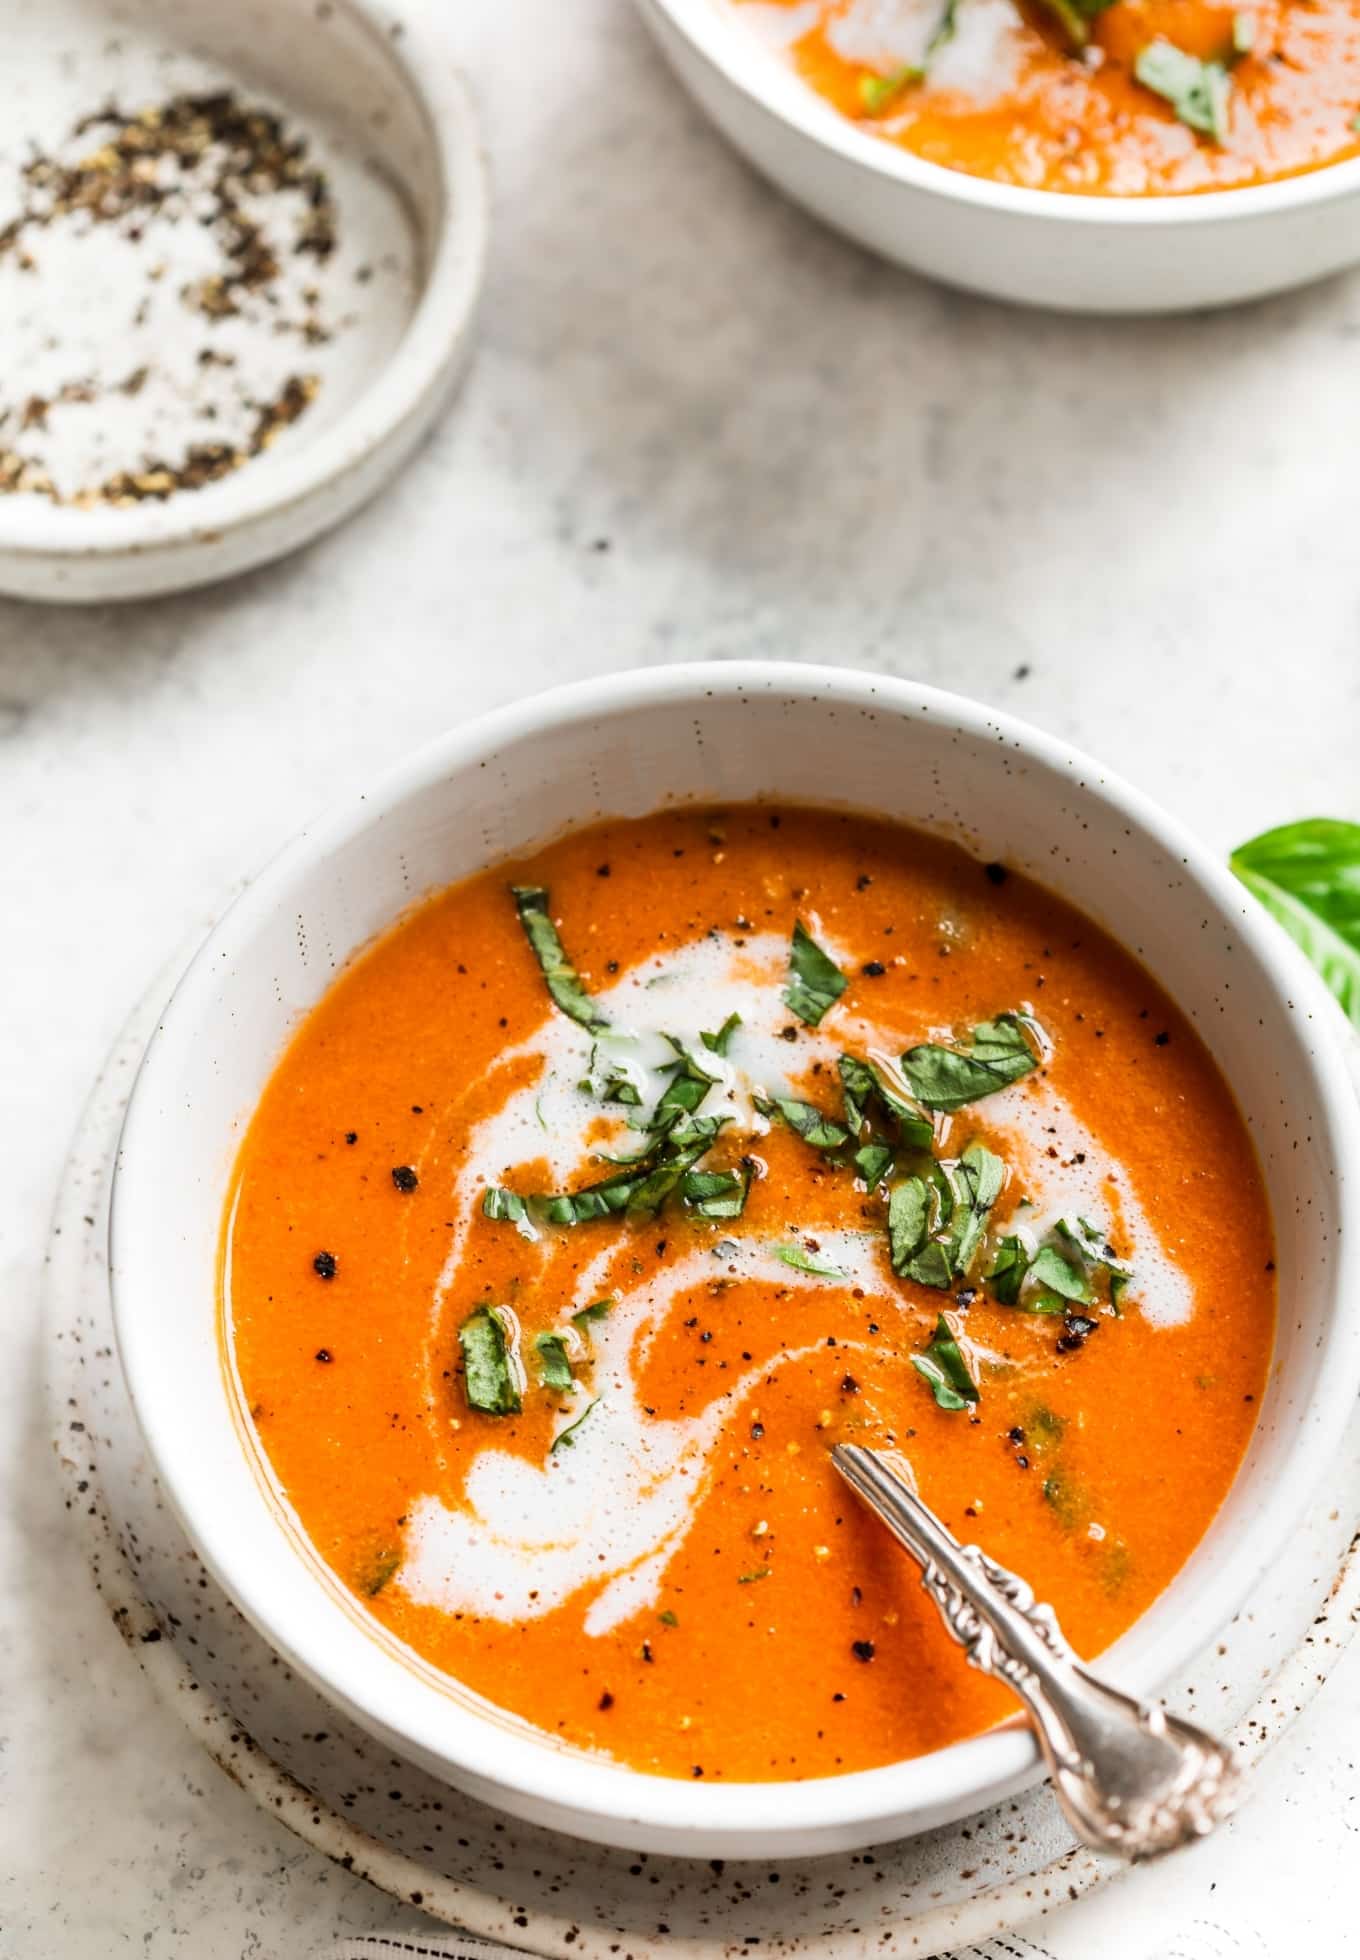 30 Minute Dairy Free Tomato Basil Soup - The Whole Cook